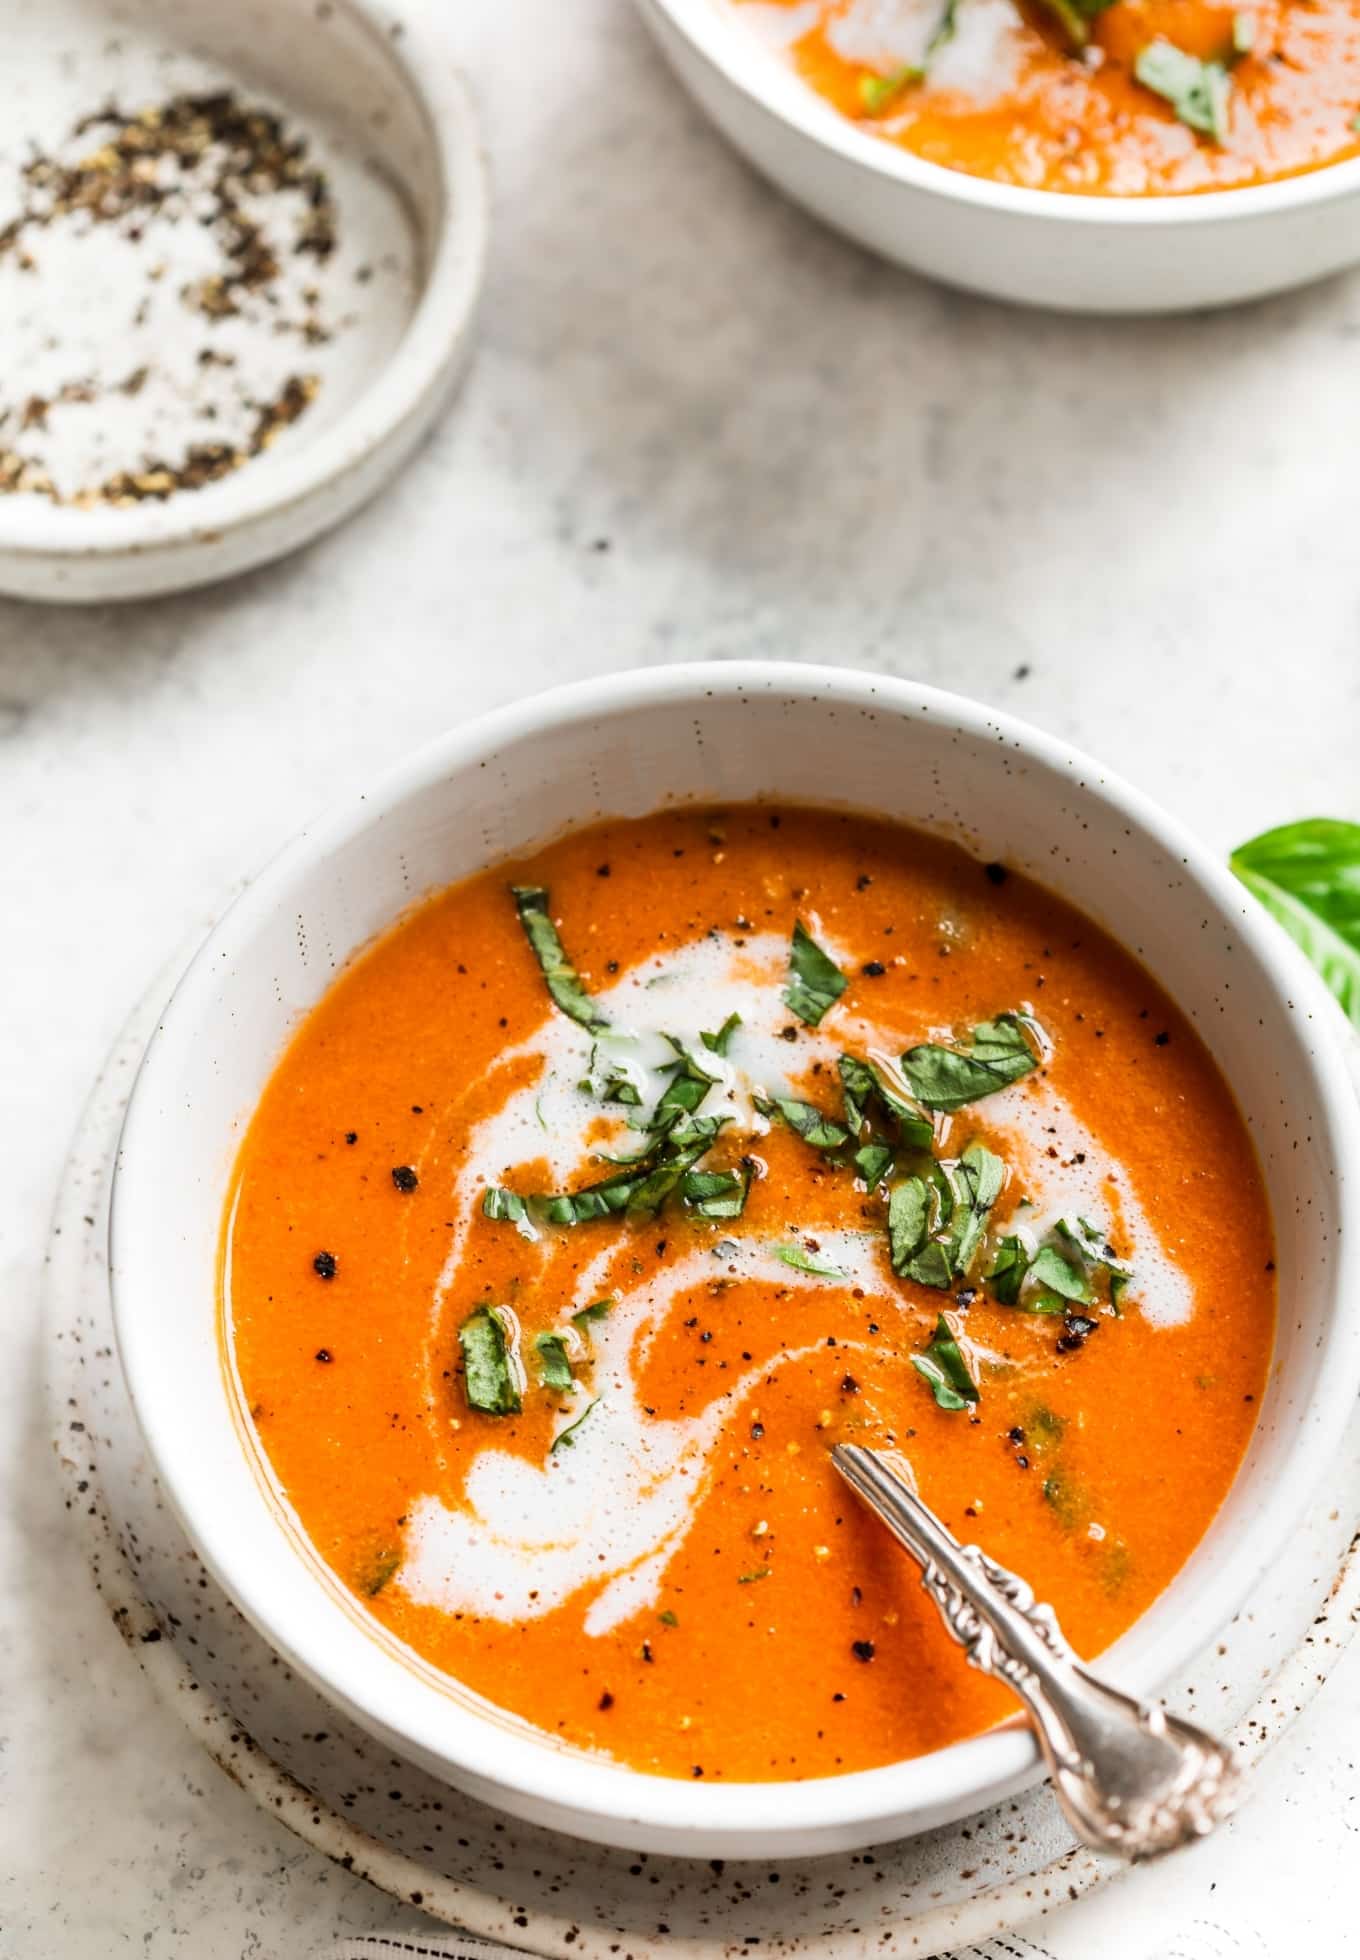 30 Minute Dairy Free Tomato Basil Soup - The Whole Cook